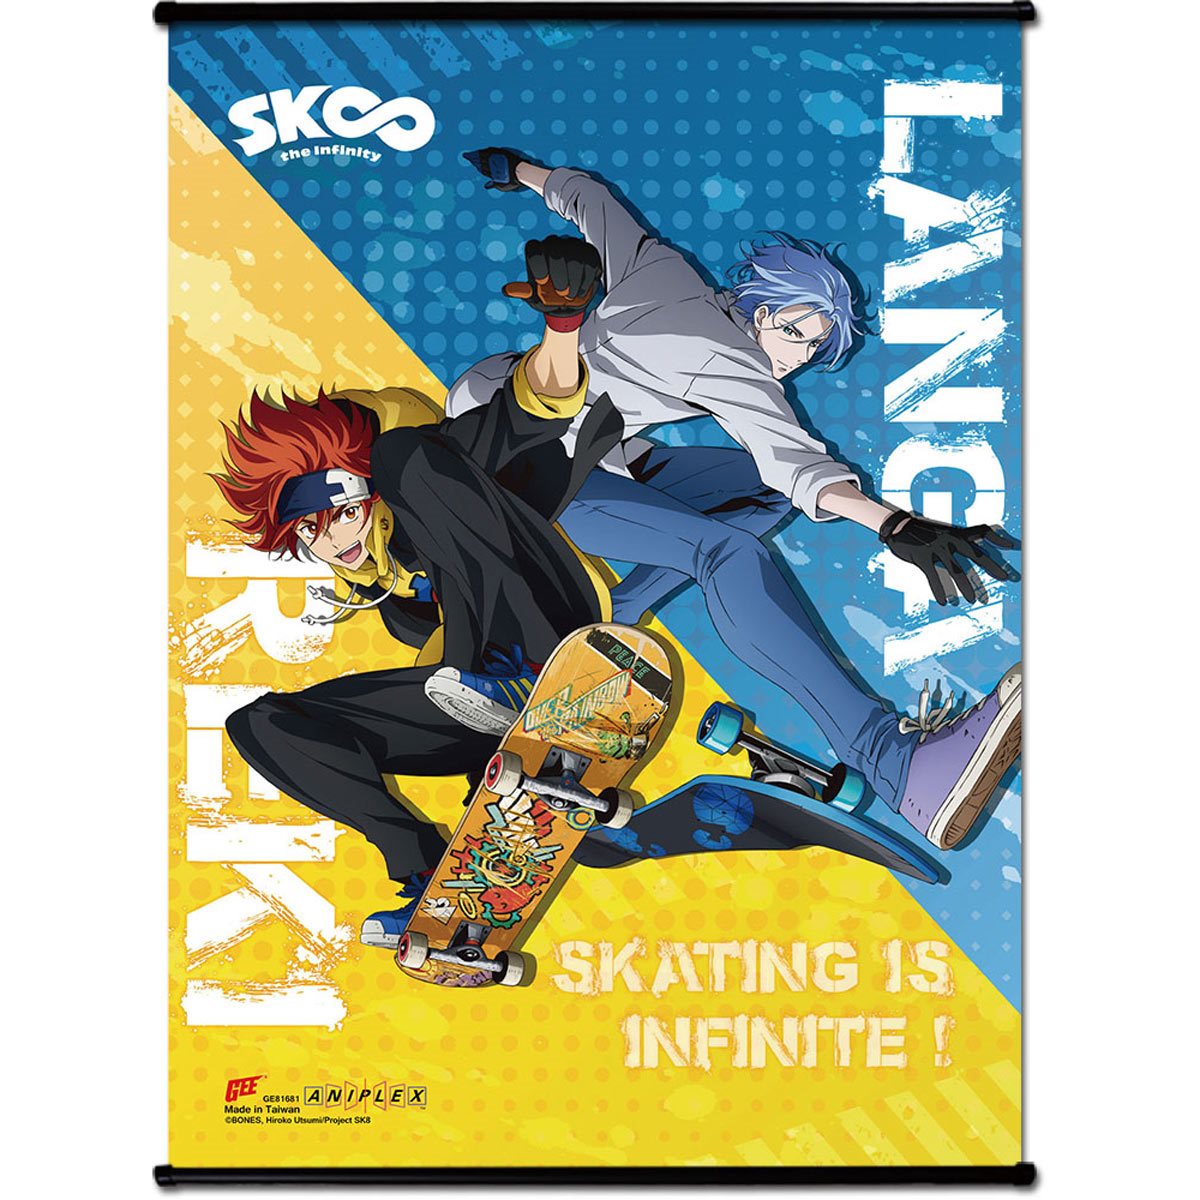 Don't fall behind, the SK8 the - SK8 the Infinity